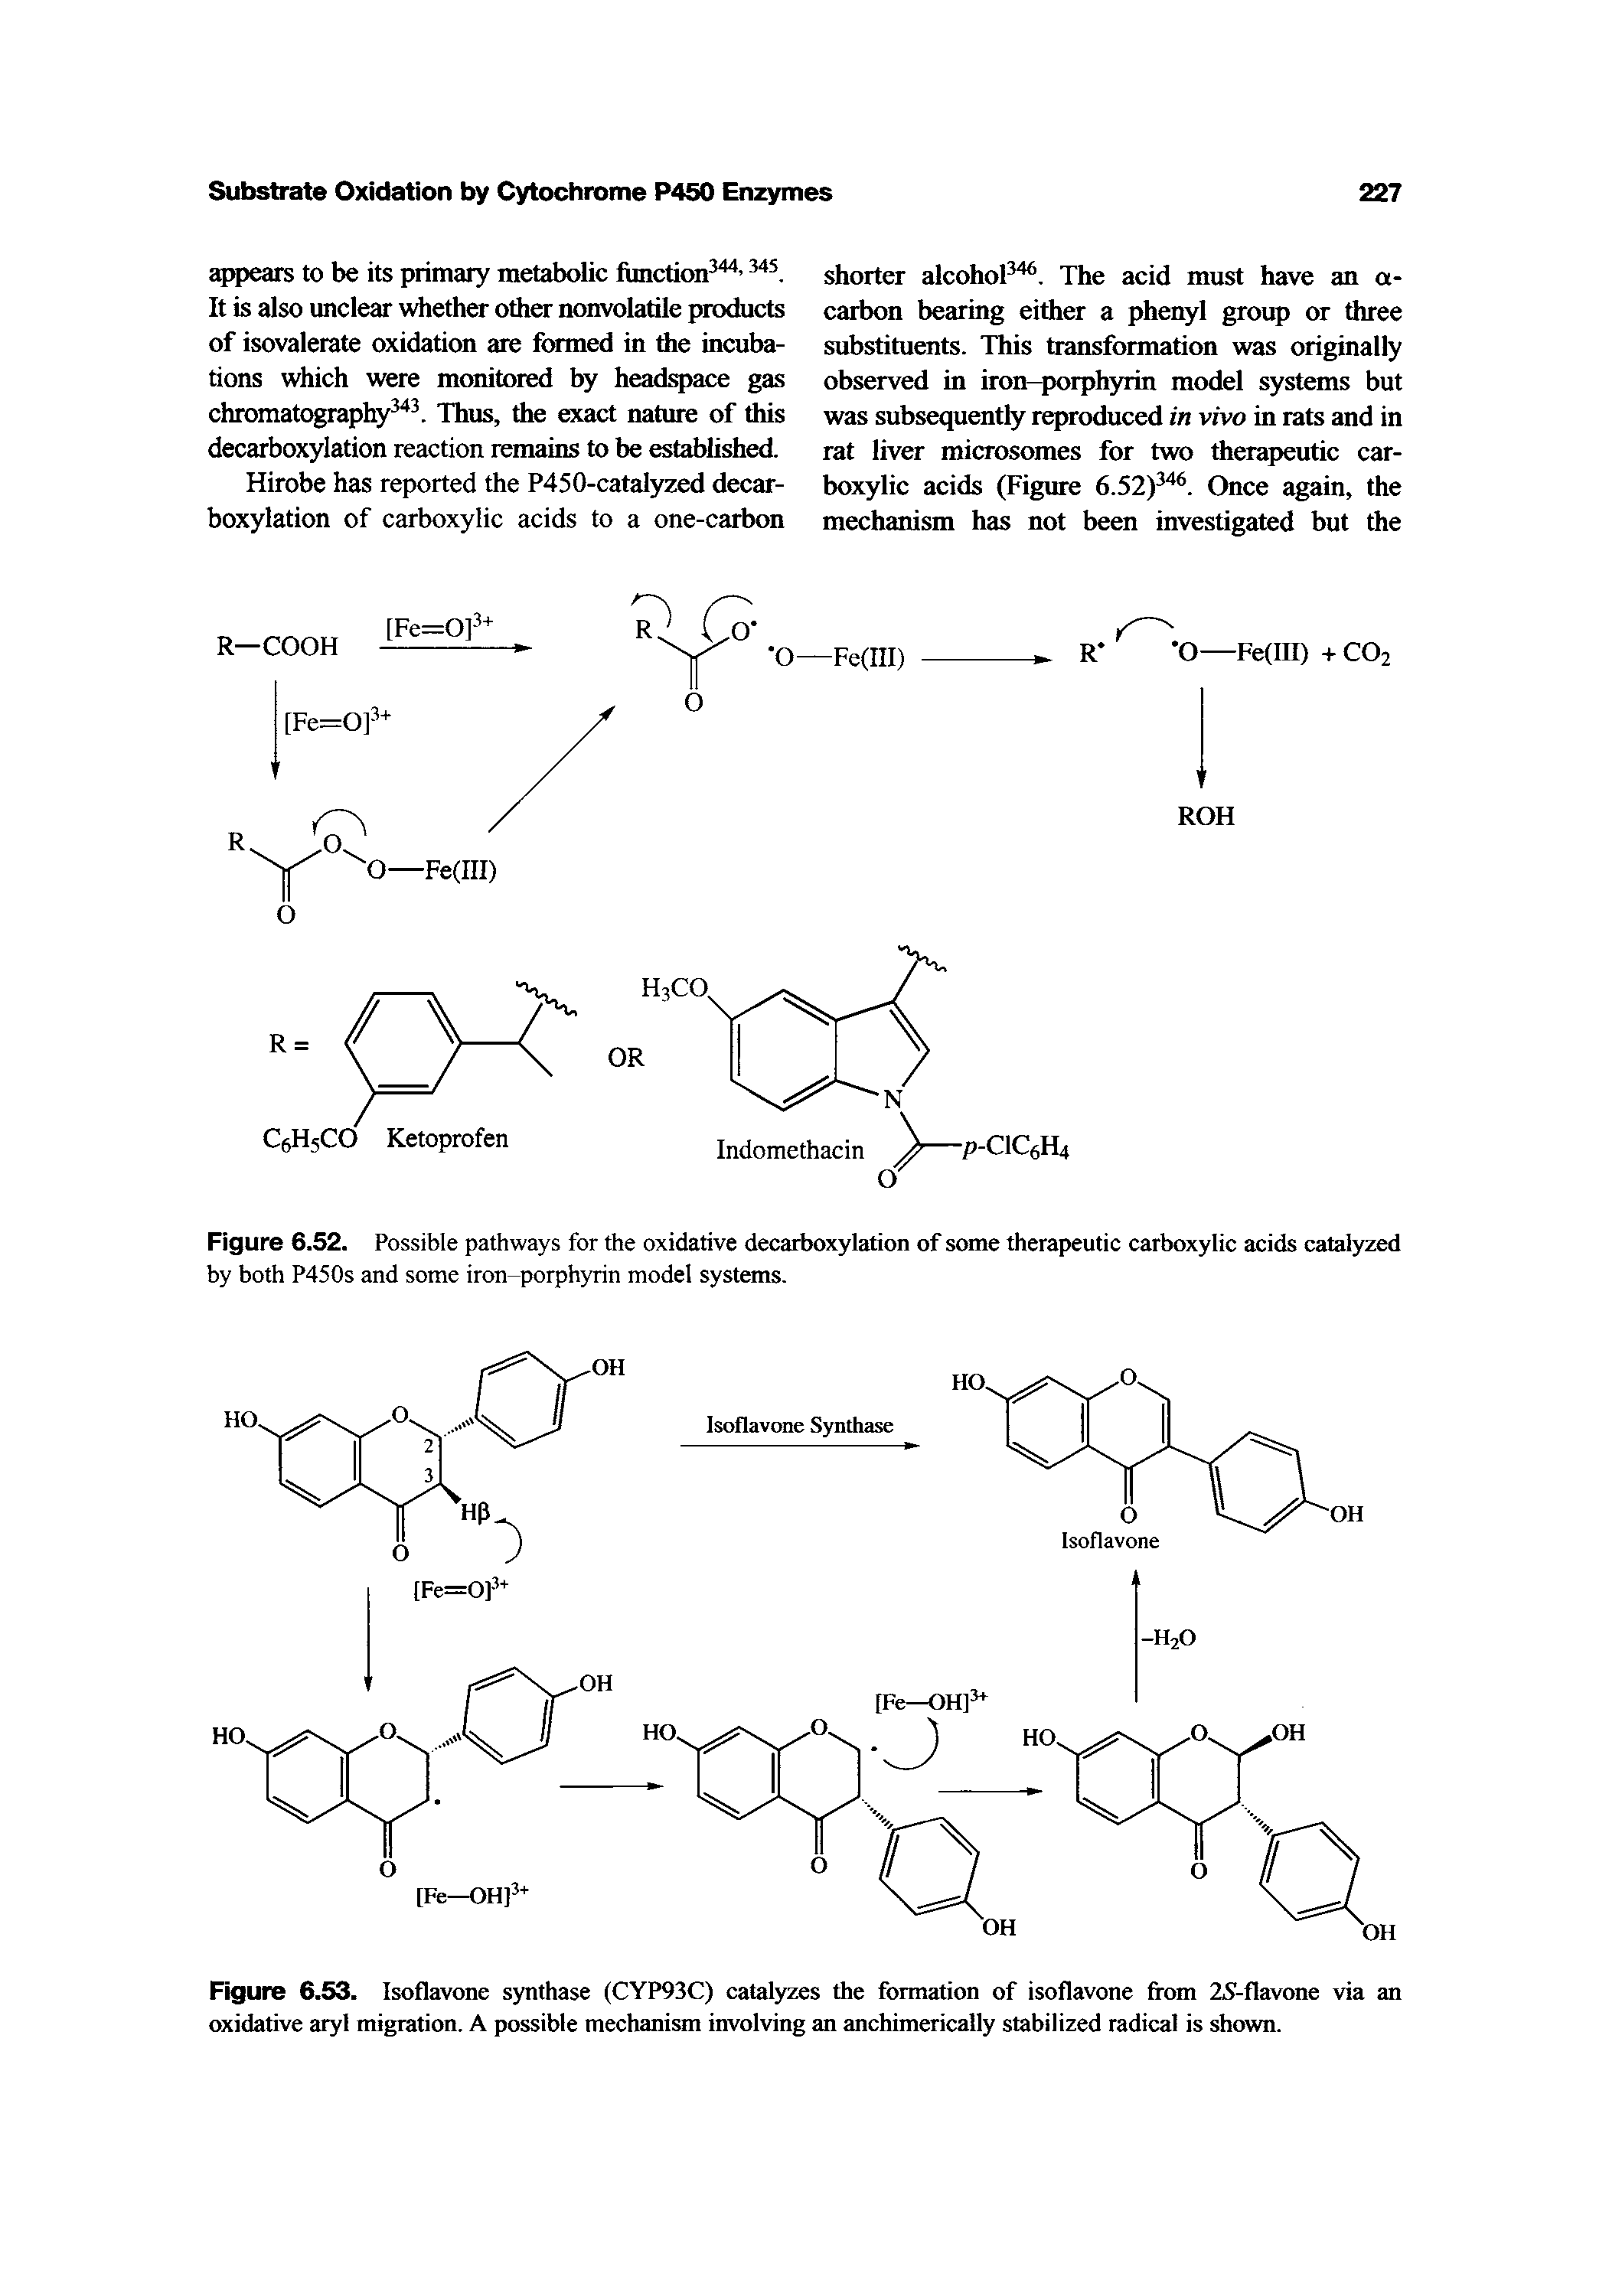 Figure 6.53. Isoflavone synthase (CYP93C) catalyzes the formation of isoflavone from 25 -flavone via an oxidative aryl migration. A possible mechanism involving an anchimerically stabilized radical is shown.